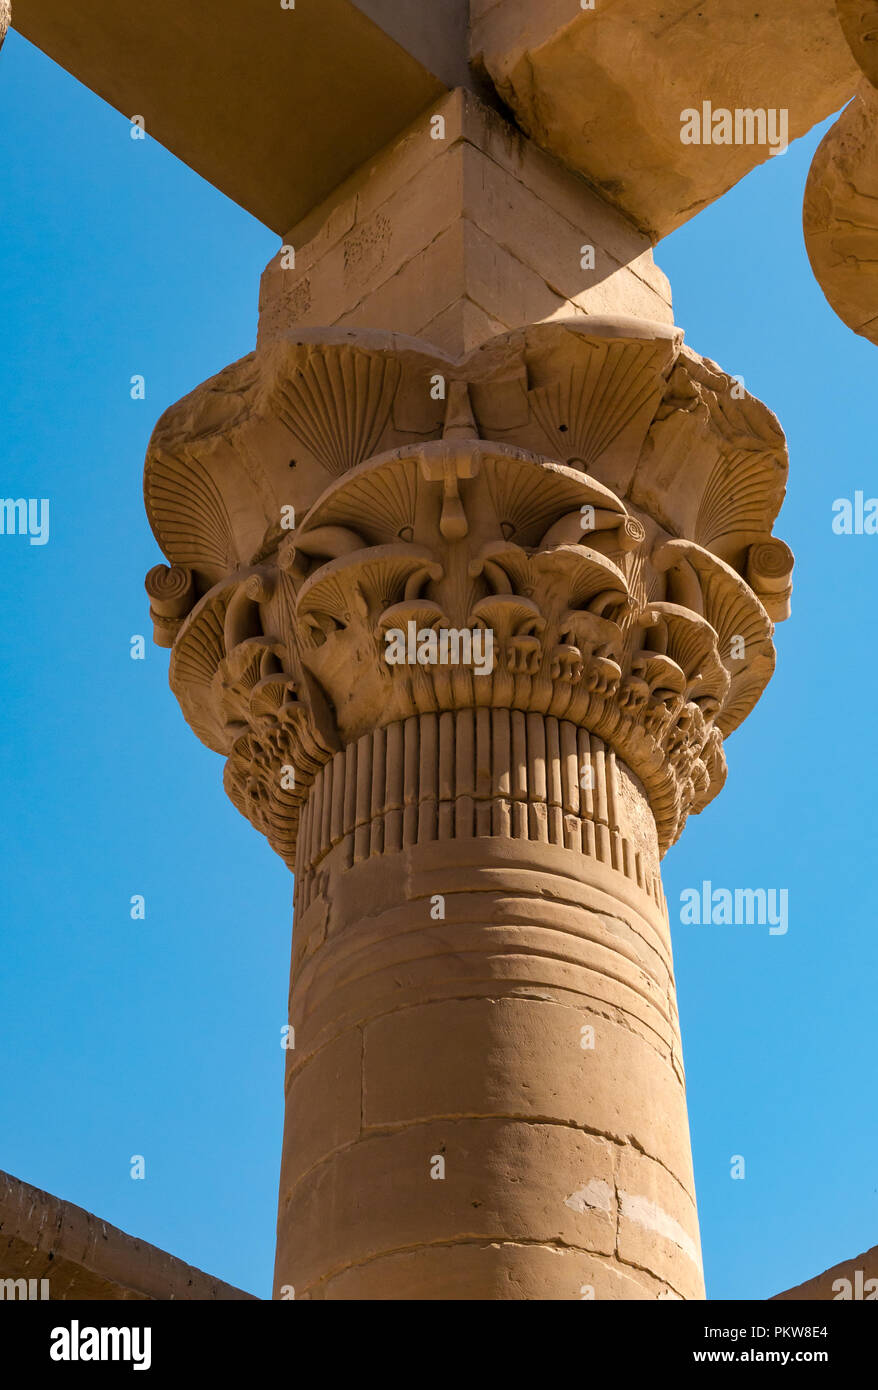 Decorative Palmiform floral pattern at top of temple column against blue sky, Temple of Philae, River Nile, Aswan, Egypt, Africa Stock Photo